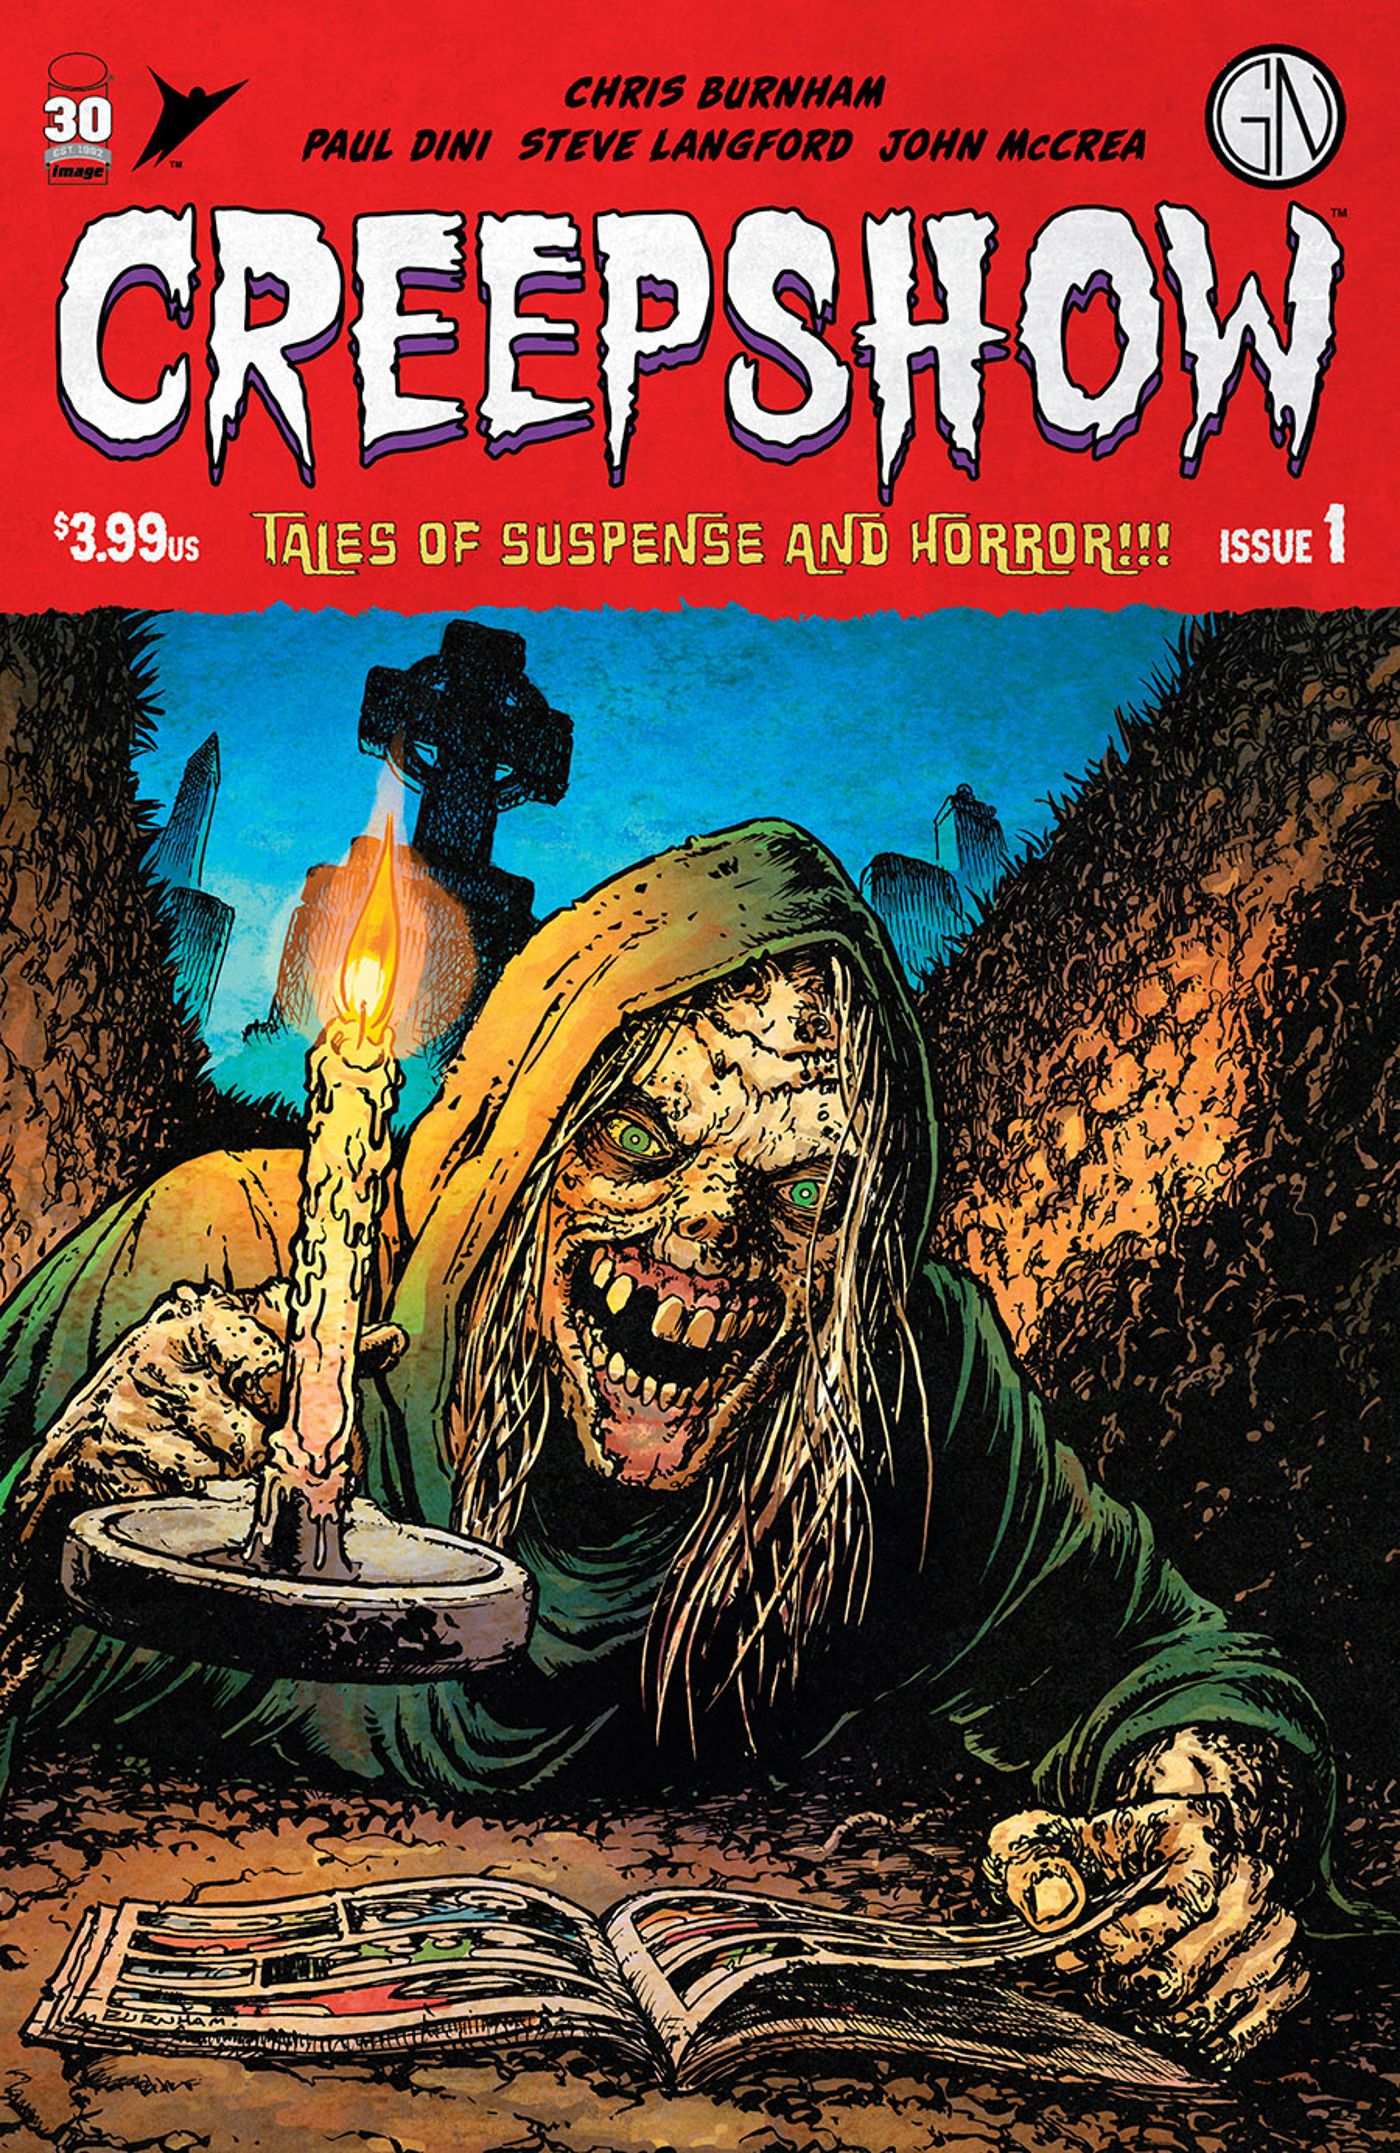 Creepshow Issue 1 Cover